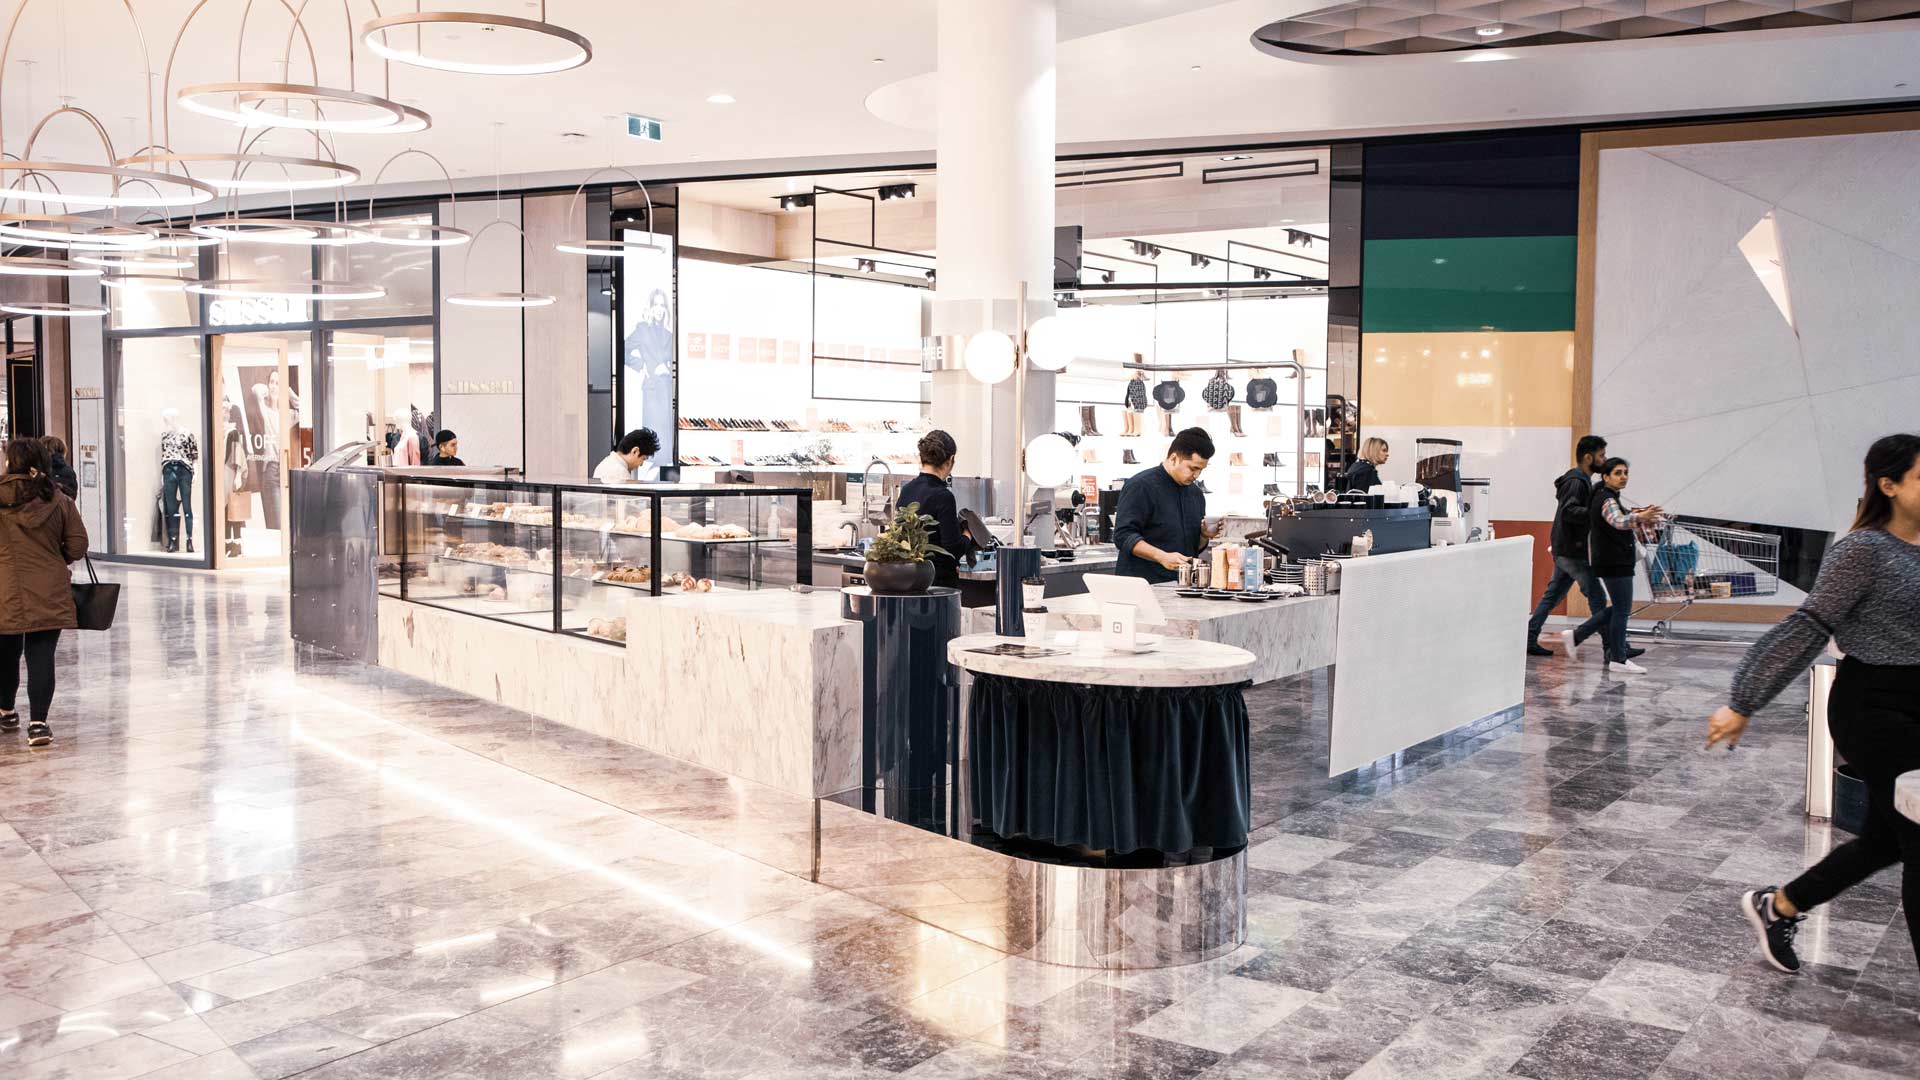 Cru+ Is the Futuristic New Coffee Shop and Patisserie Hidden Inside a Shopping Centre